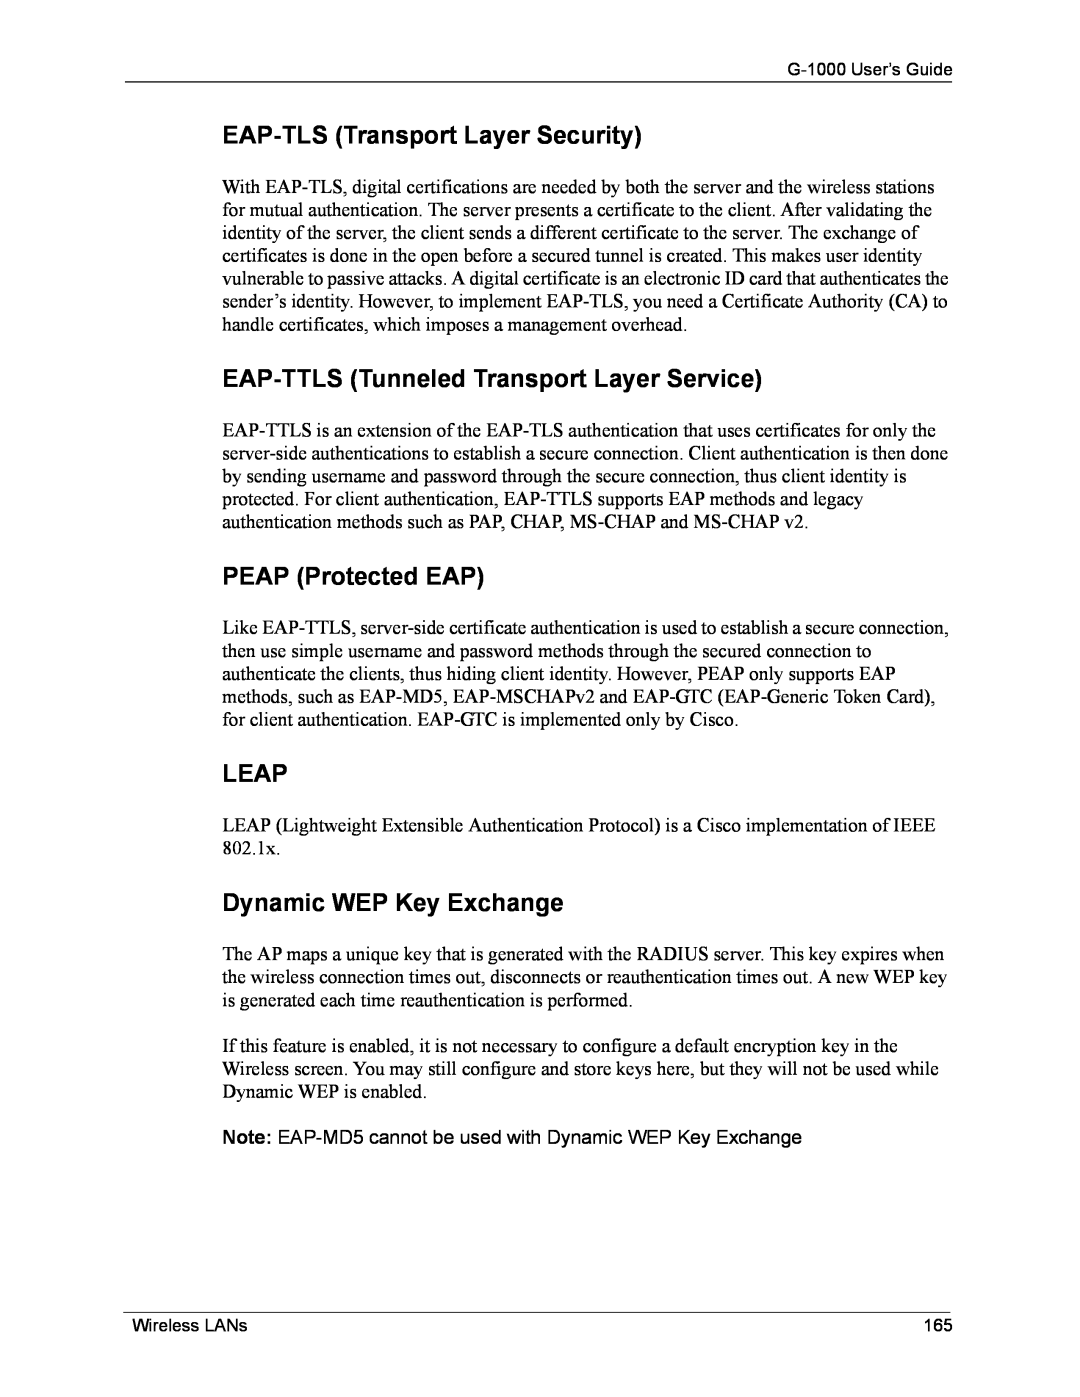 ZyXEL Communications G-1000 manual EAP-TLS Transport Layer Security, EAP-TTLS Tunneled Transport Layer Service, Leap 